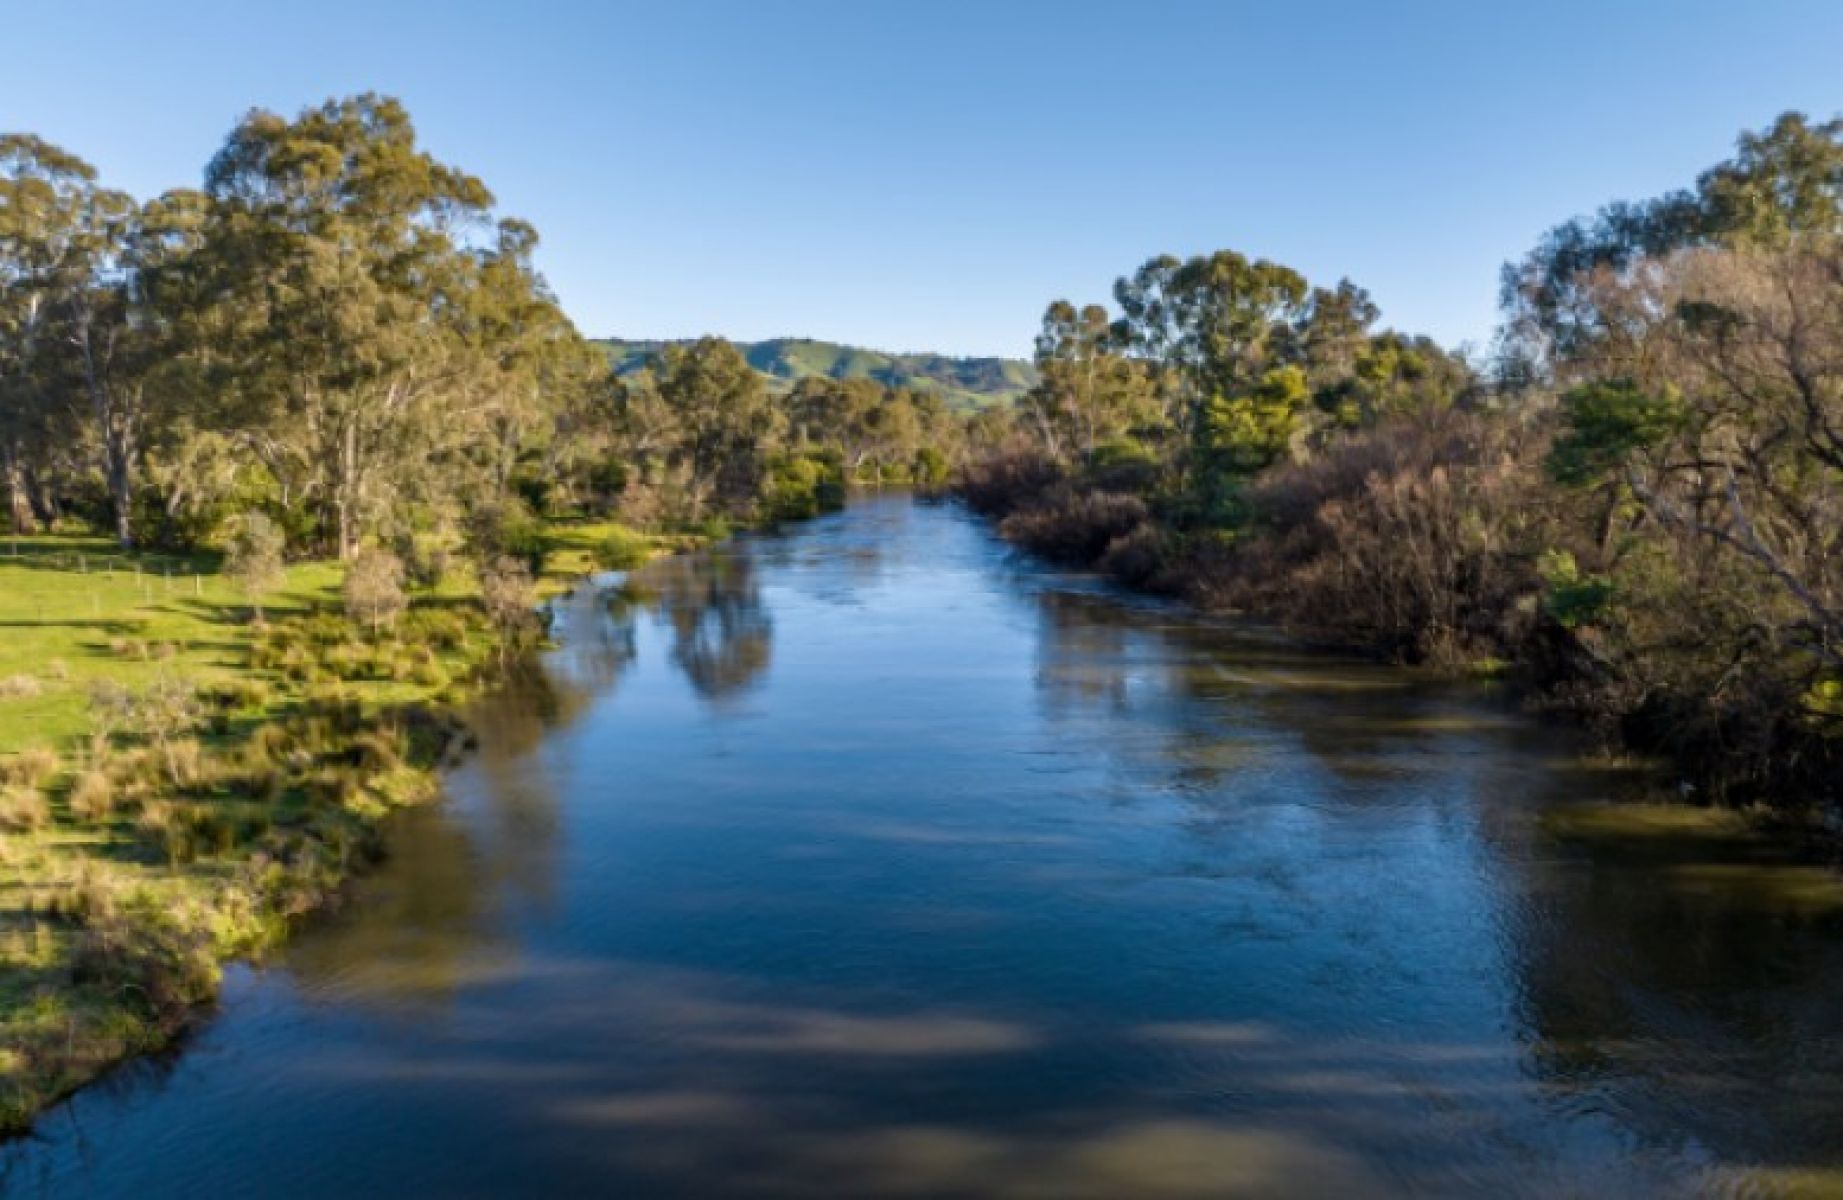 Overhead drone footage of the Goulburn Murray River area